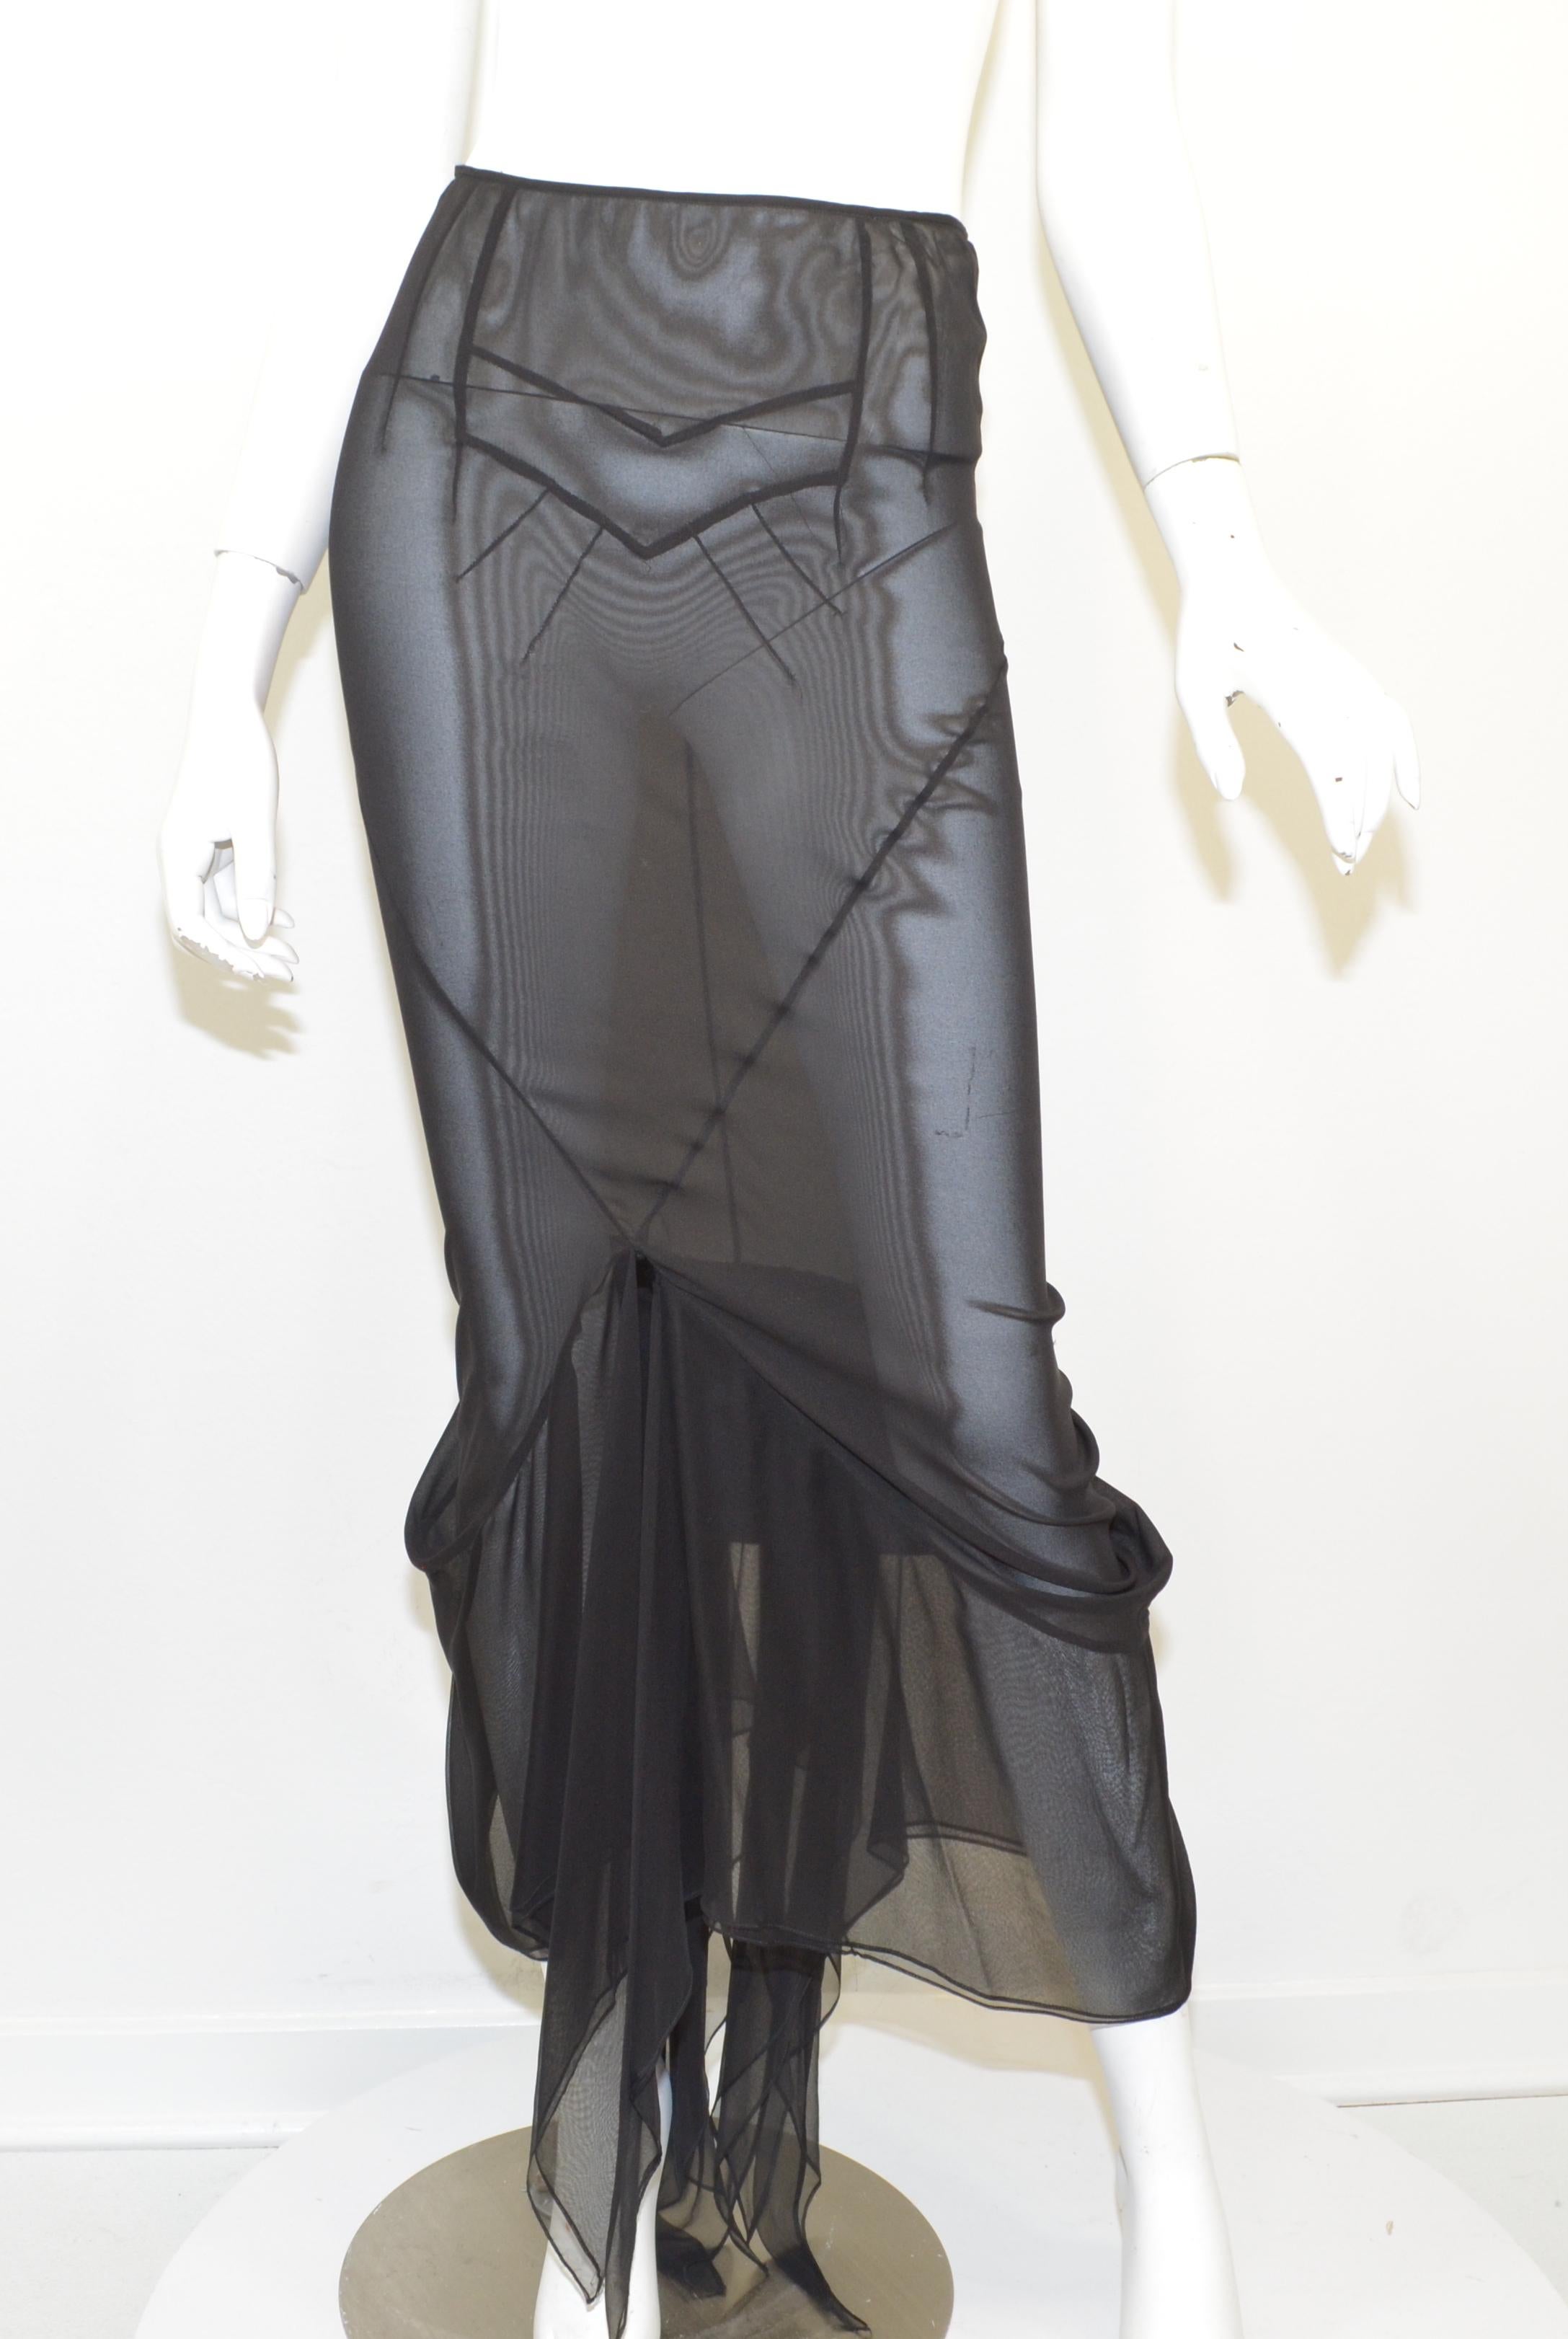 Dolce & Gabbana sheer black silk Chiffon maxi with uneven hem. Back zipper, bias cut to conform to the body. French seams at style lines. Gorgeous on. Made in Italy

Waist 26